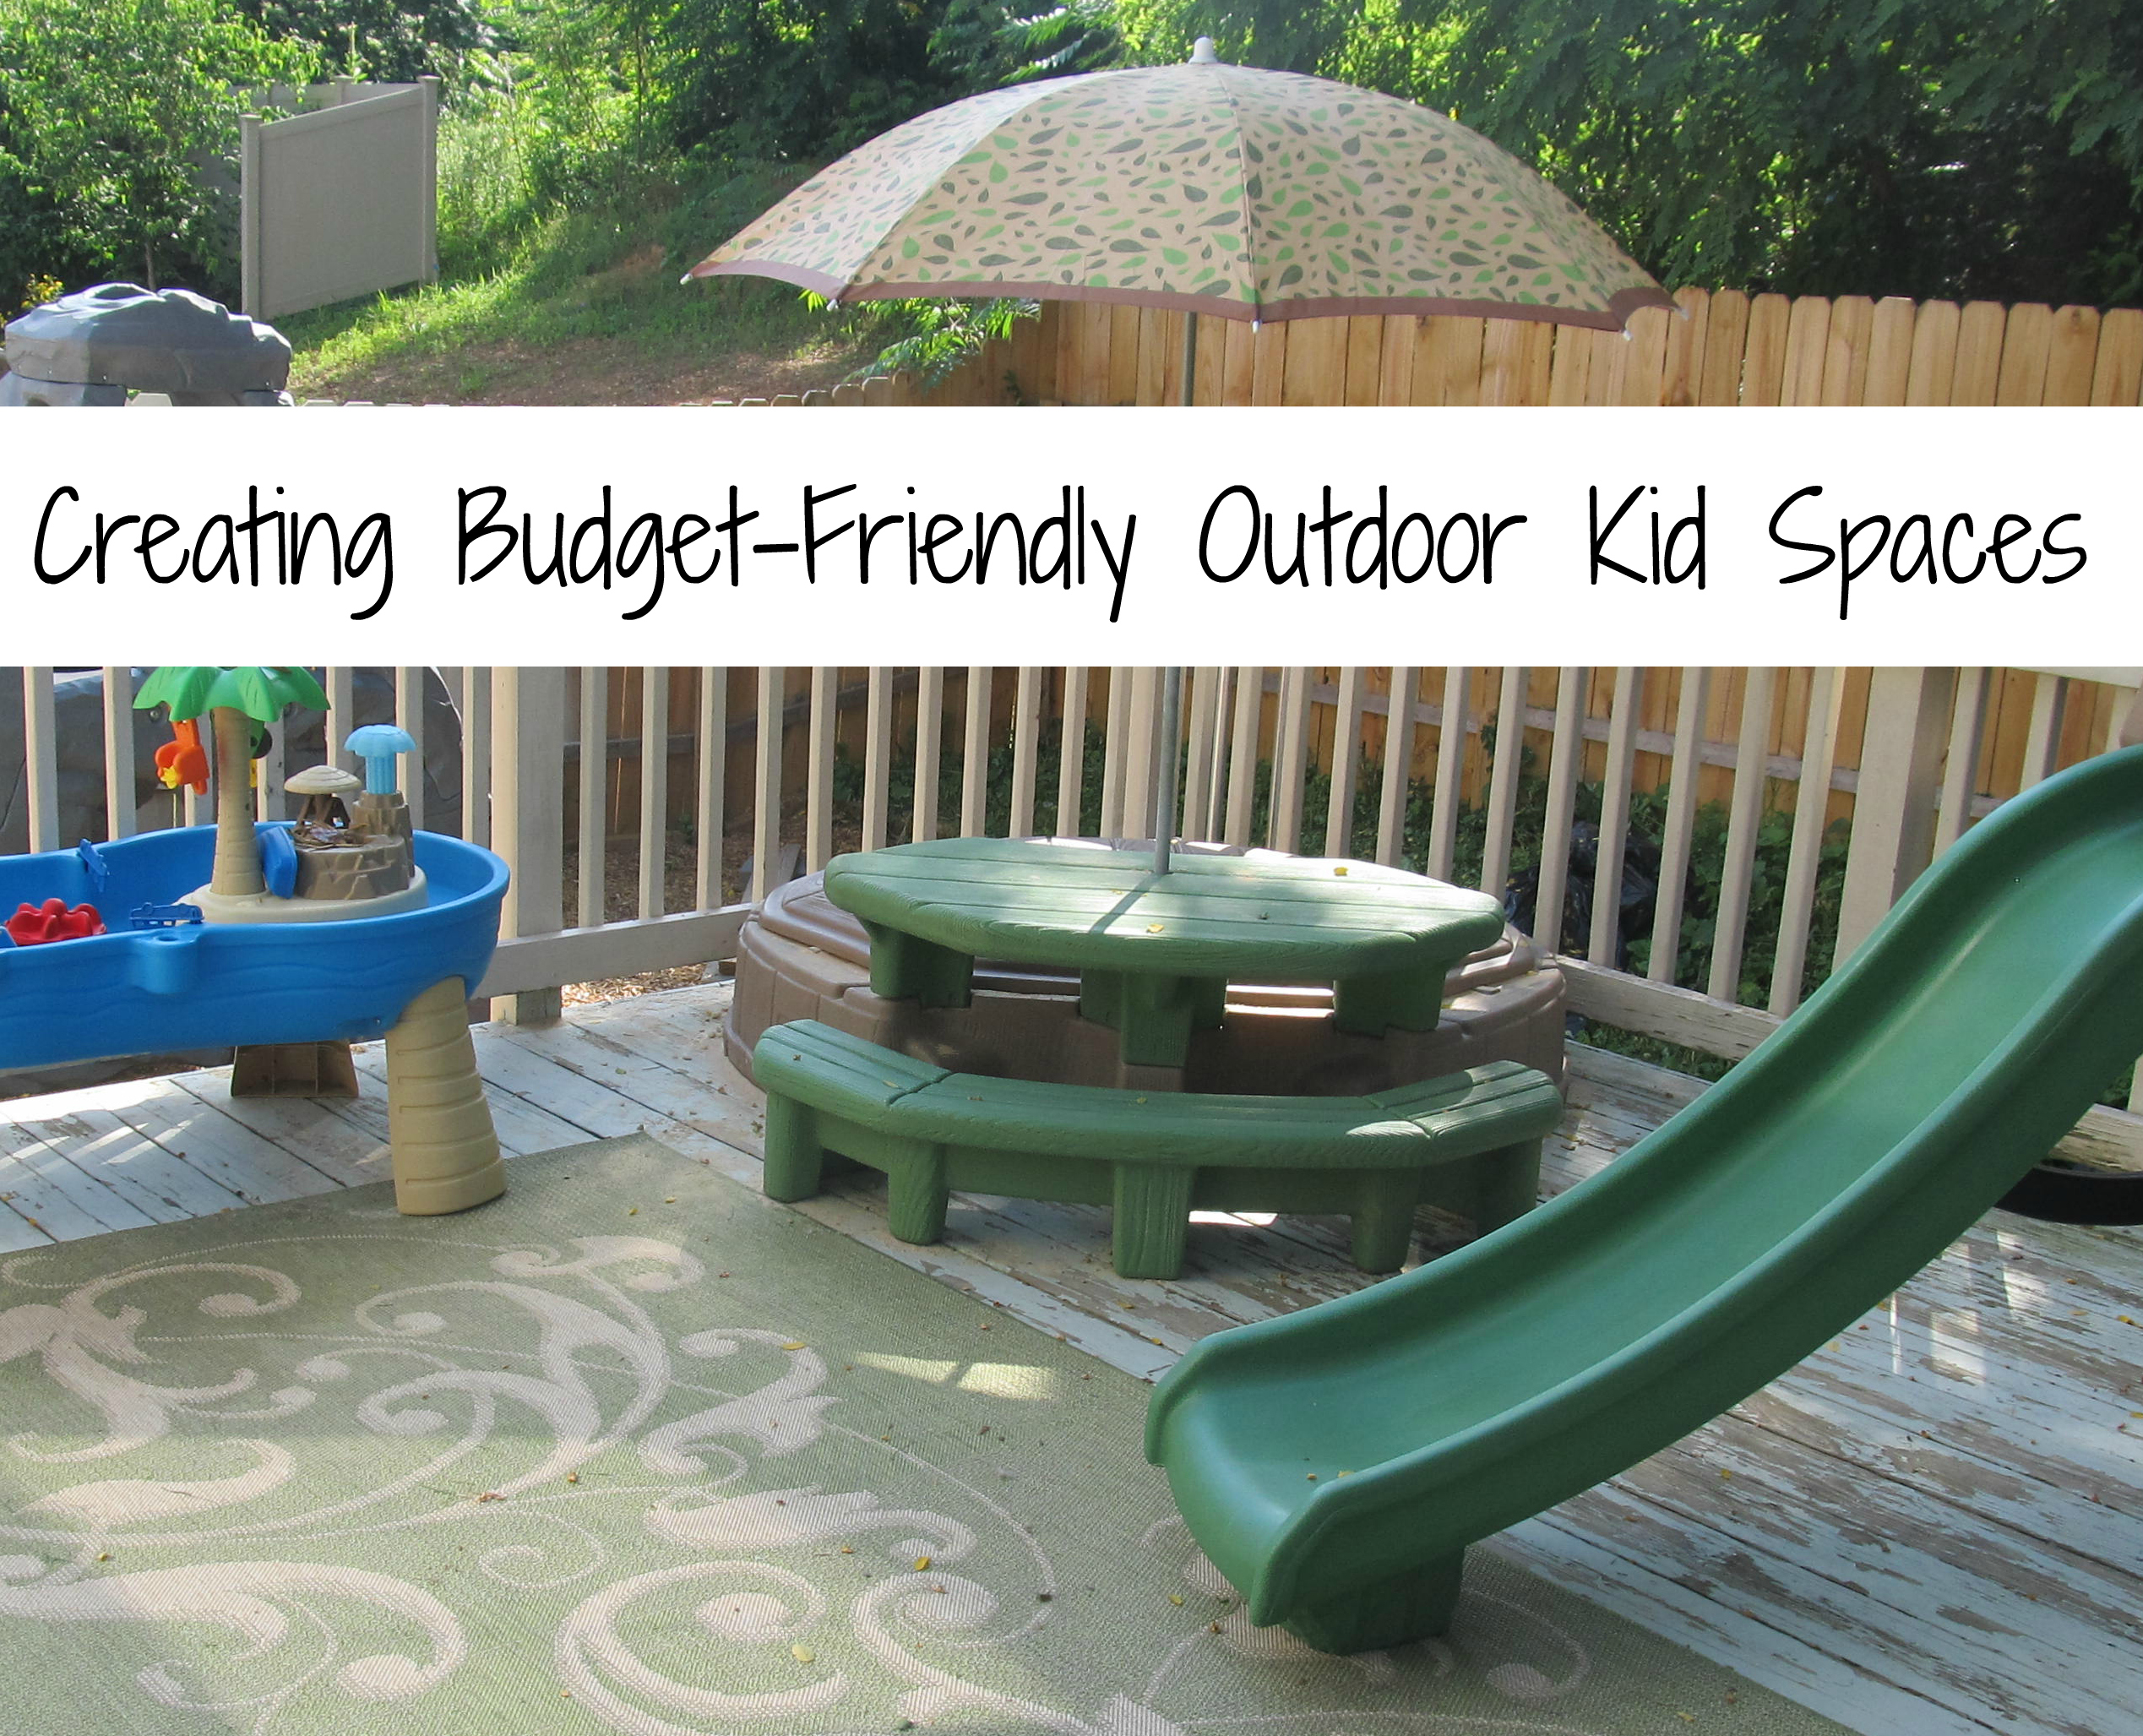 Creating Budget-Friendly Outdoor Kid Spaces